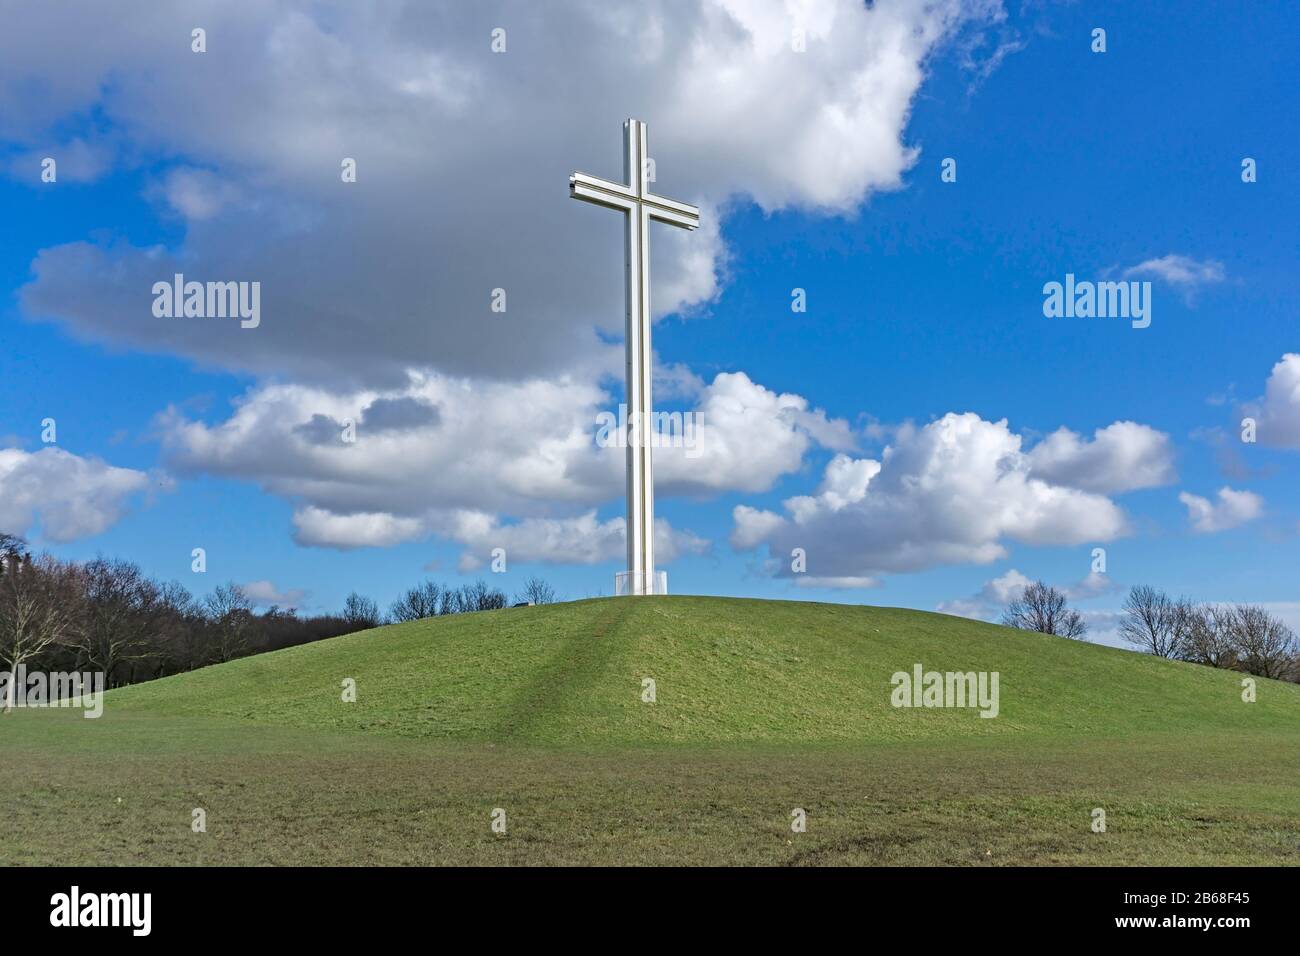 The Papal Cross in the Phoenix Park, erected in 1979 for the visit of Pope John Paul 11, when over 1 million people attended a mass he celebrated. Stock Photo